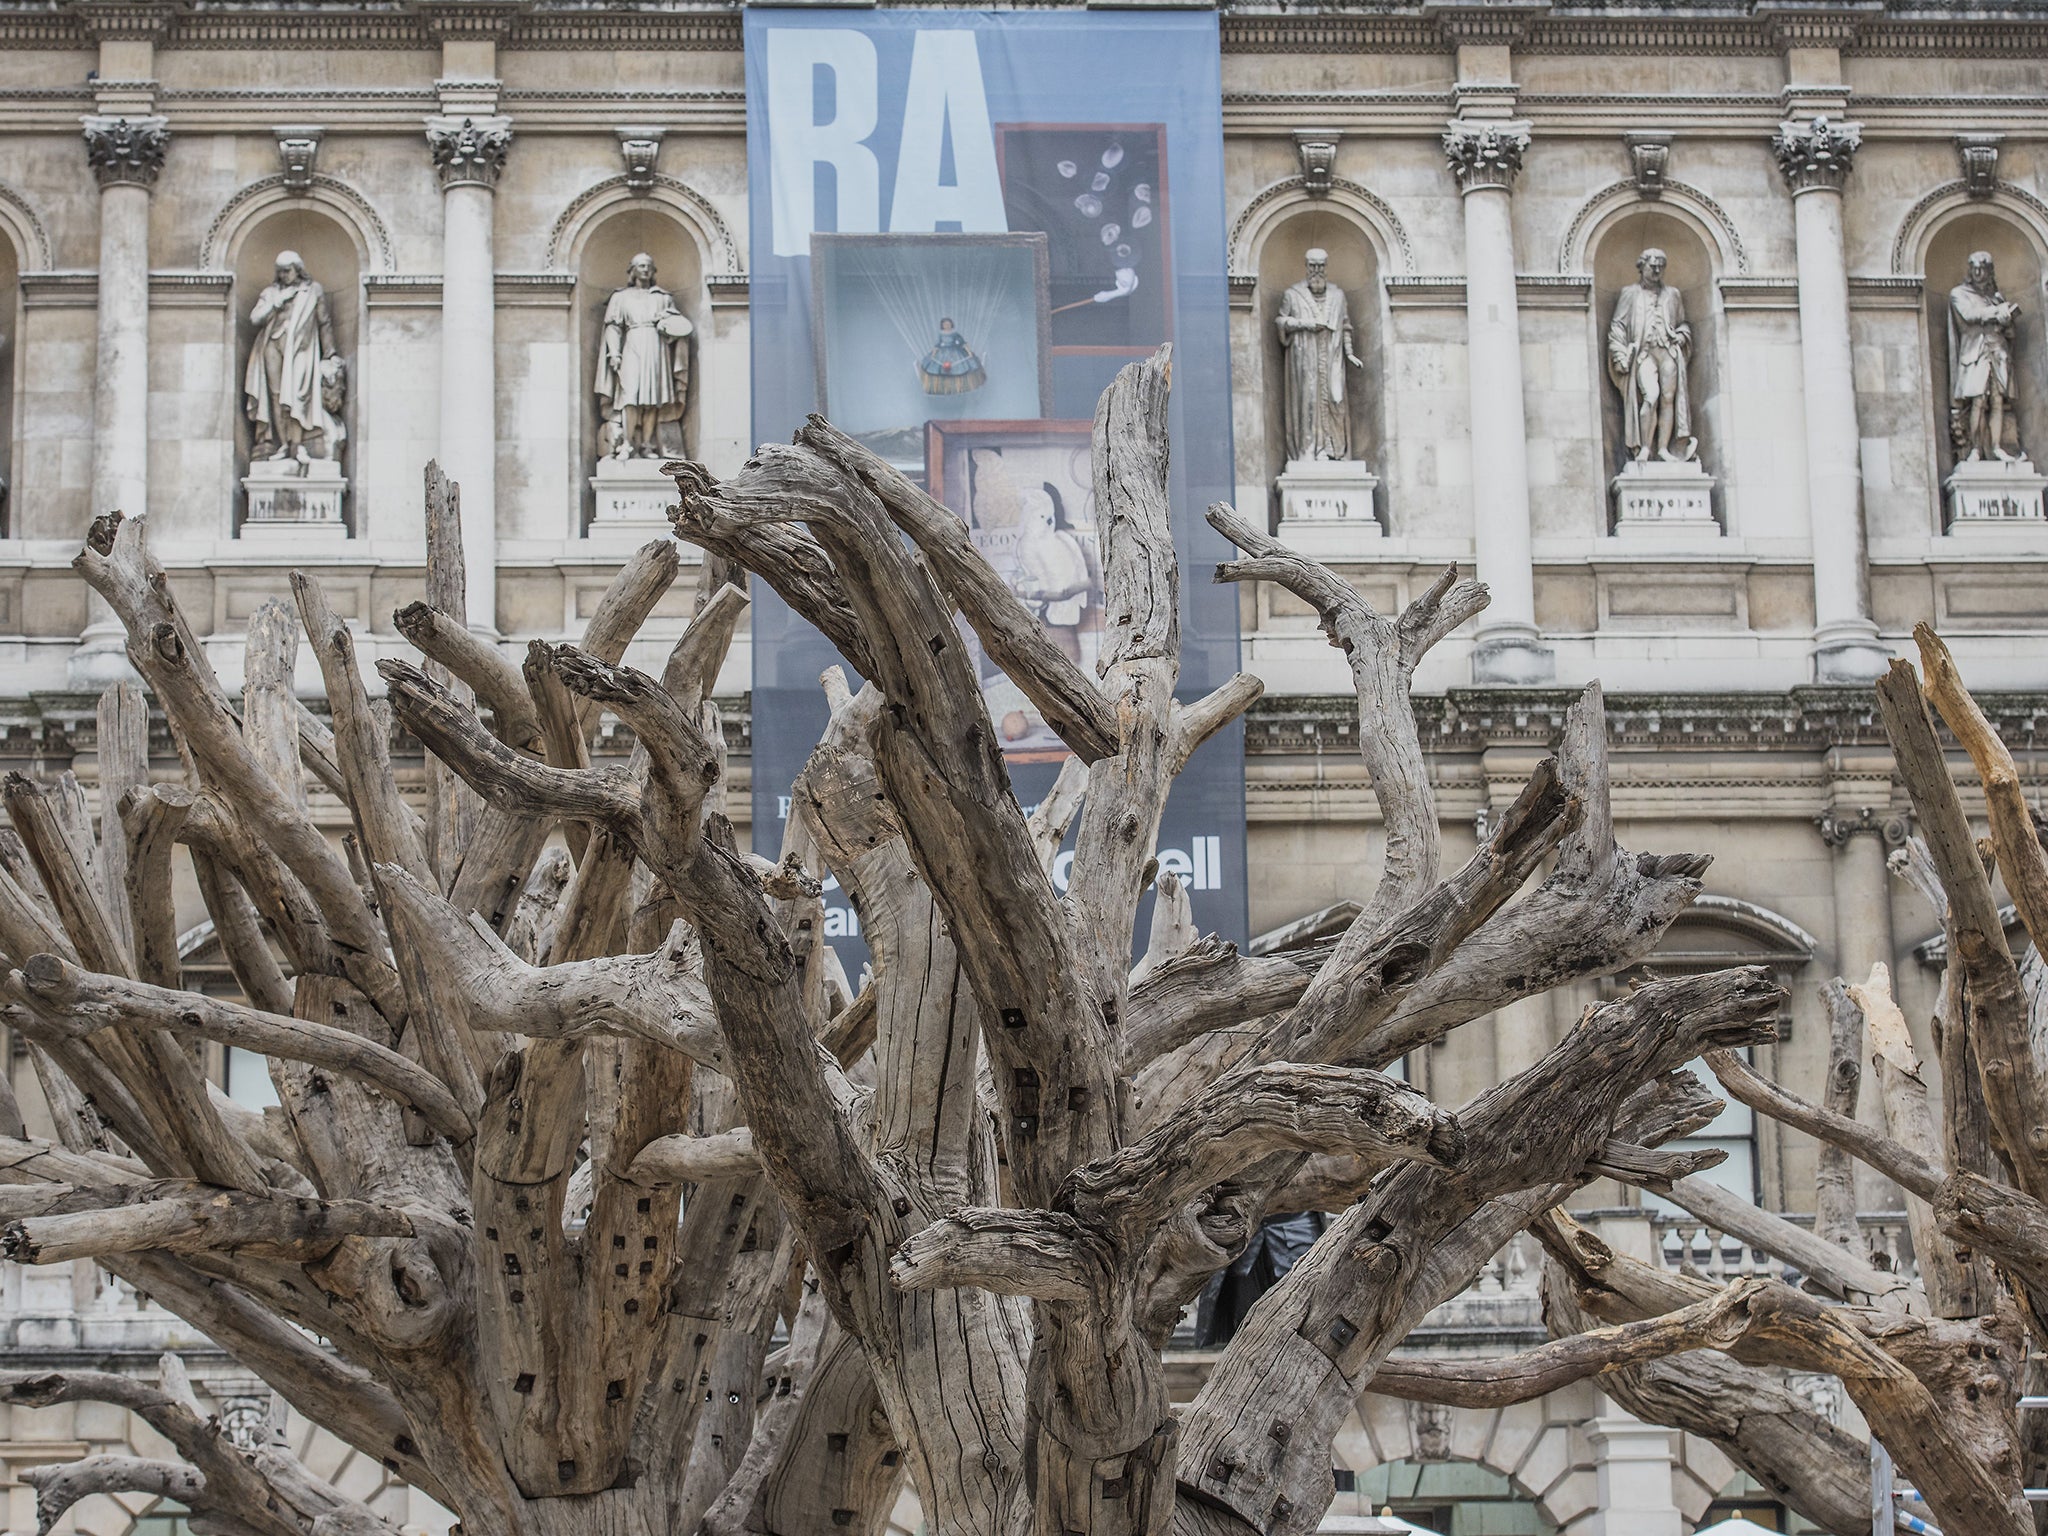 Ai Weiwei's tree sculptures taking shape in the courtyard of London's Royal Academy